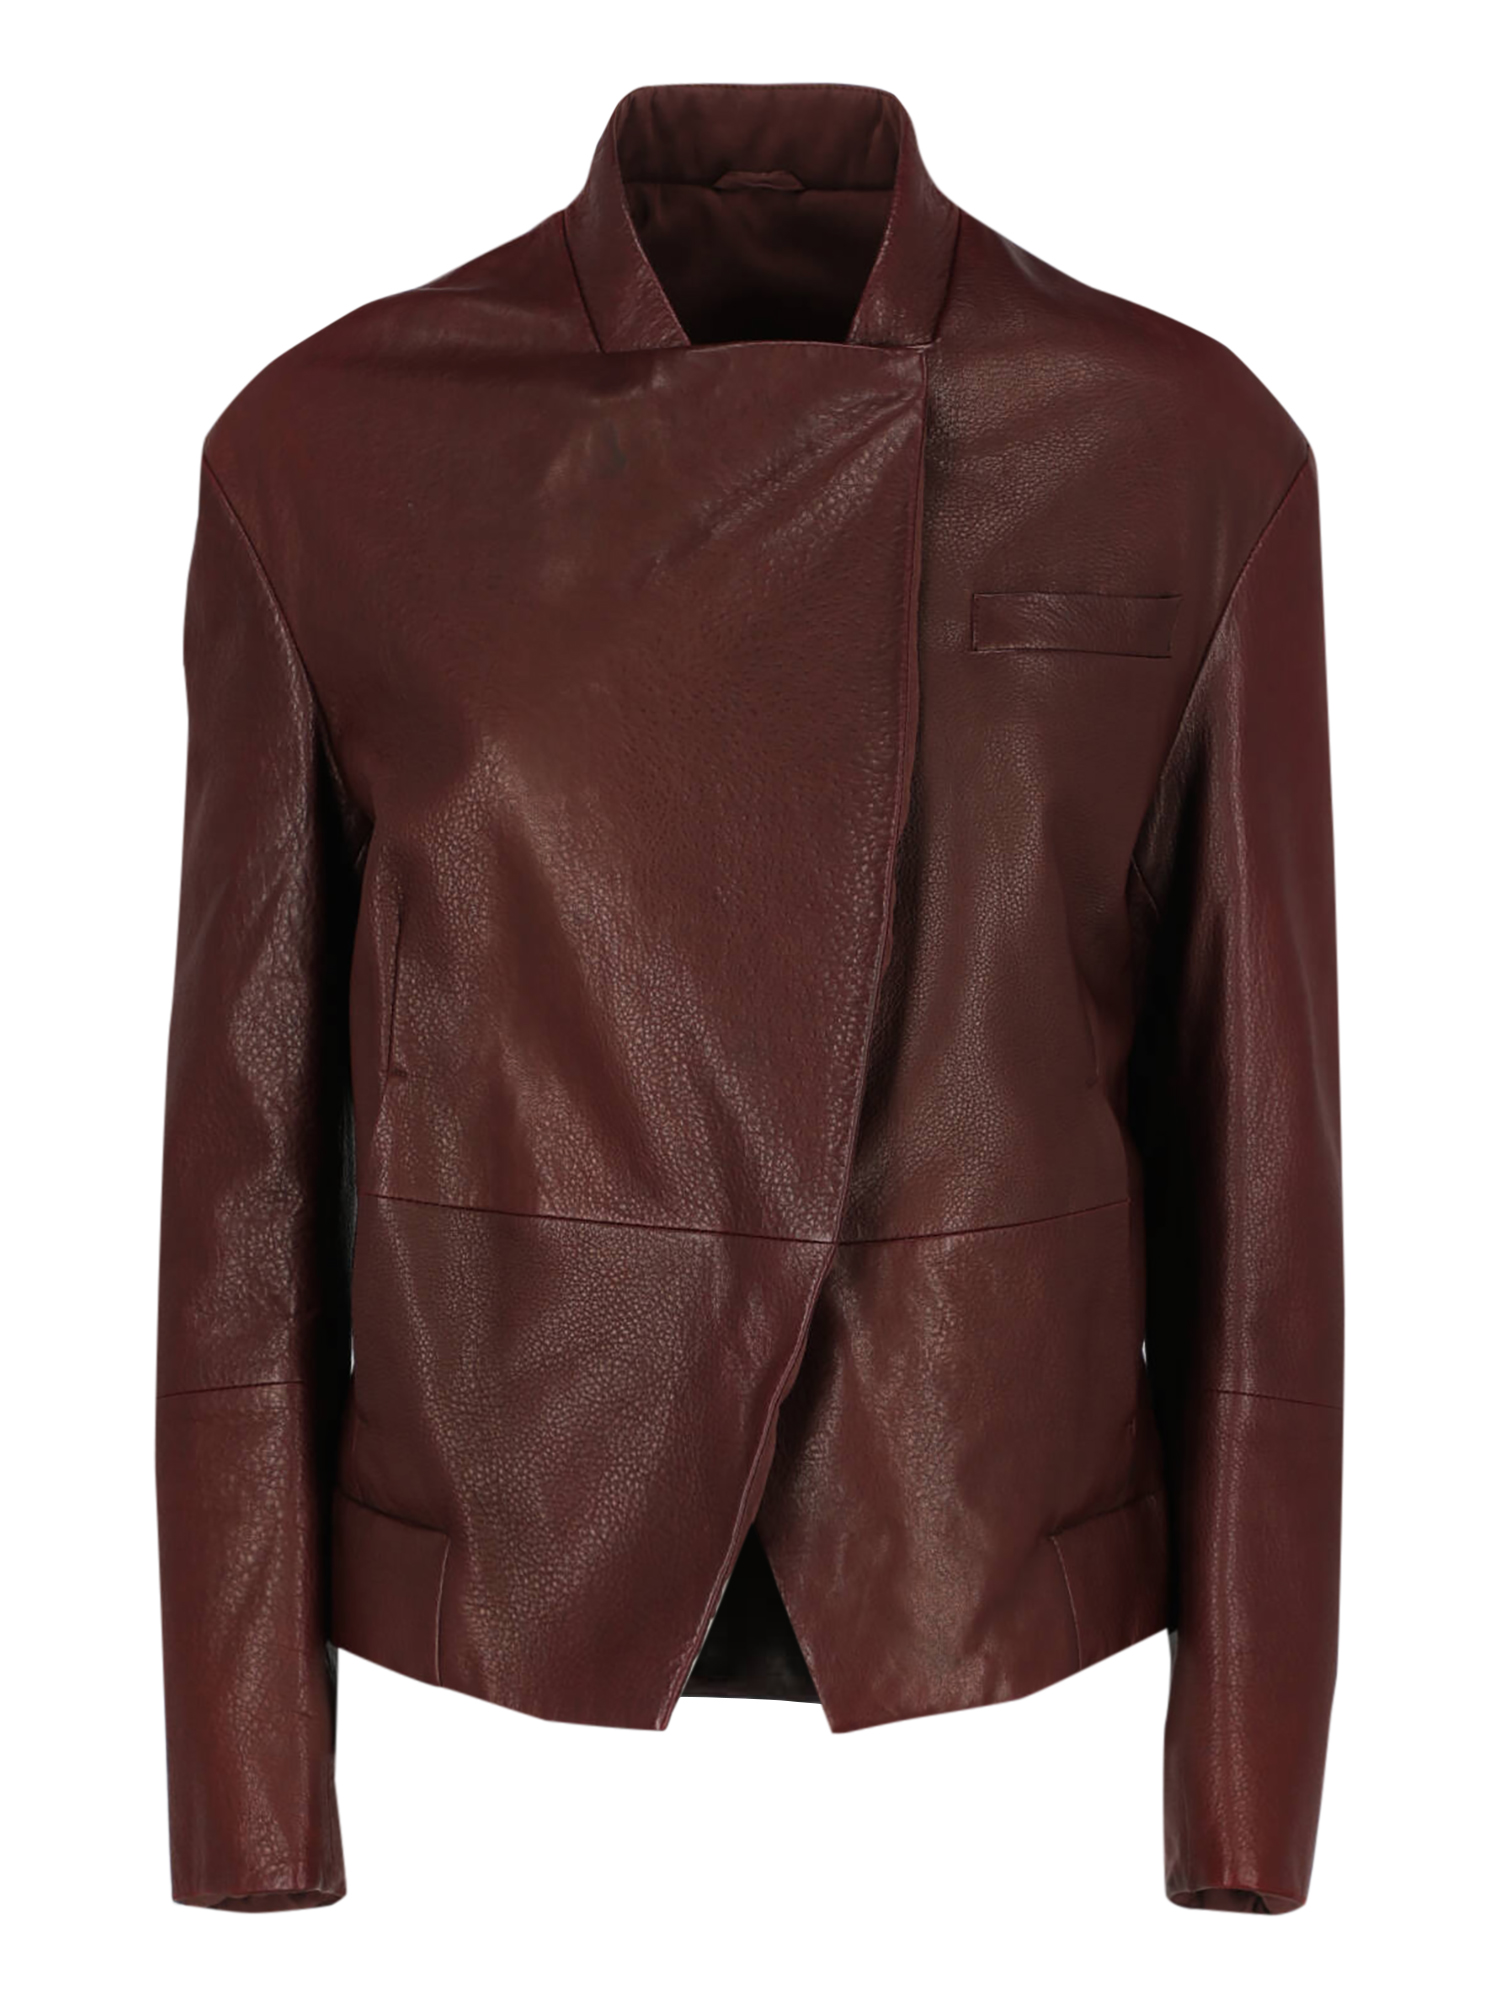 Condition: Very Good, Solid Color Leather, Color: Burgundy - M - IT 42 -